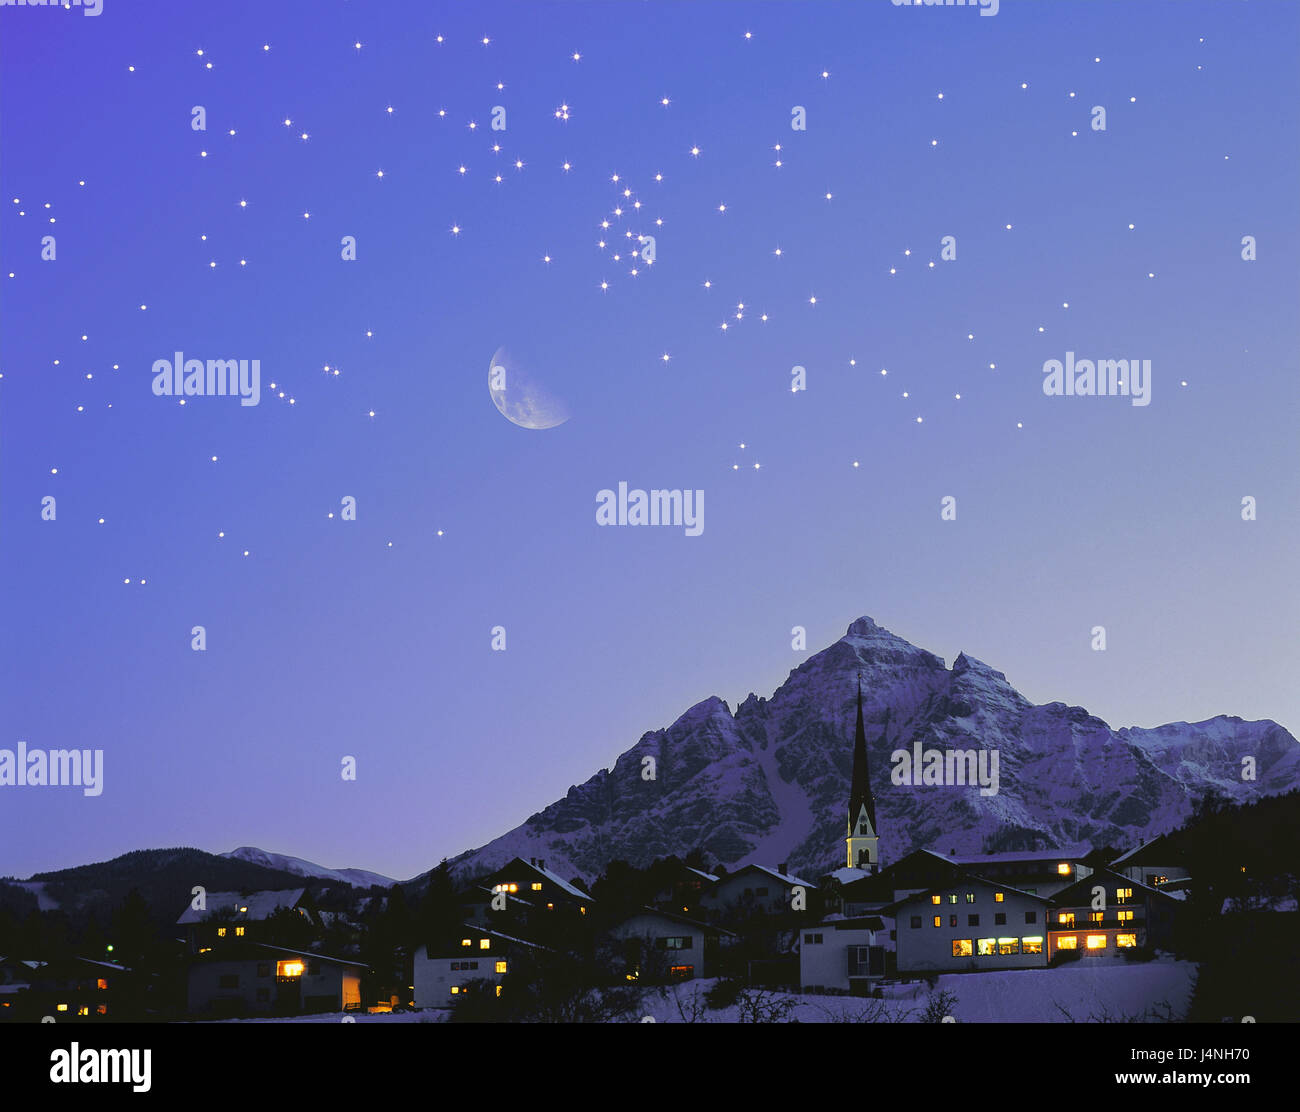 Austria, Tyrol, Mutters, local view, lights, evening, mountain Serles, starry sky, [M], place, houses, residential houses, church, steeple, lighting, mountains, alps, heavens, evening heavens, stars, atmospheric, [M] Stock Photo